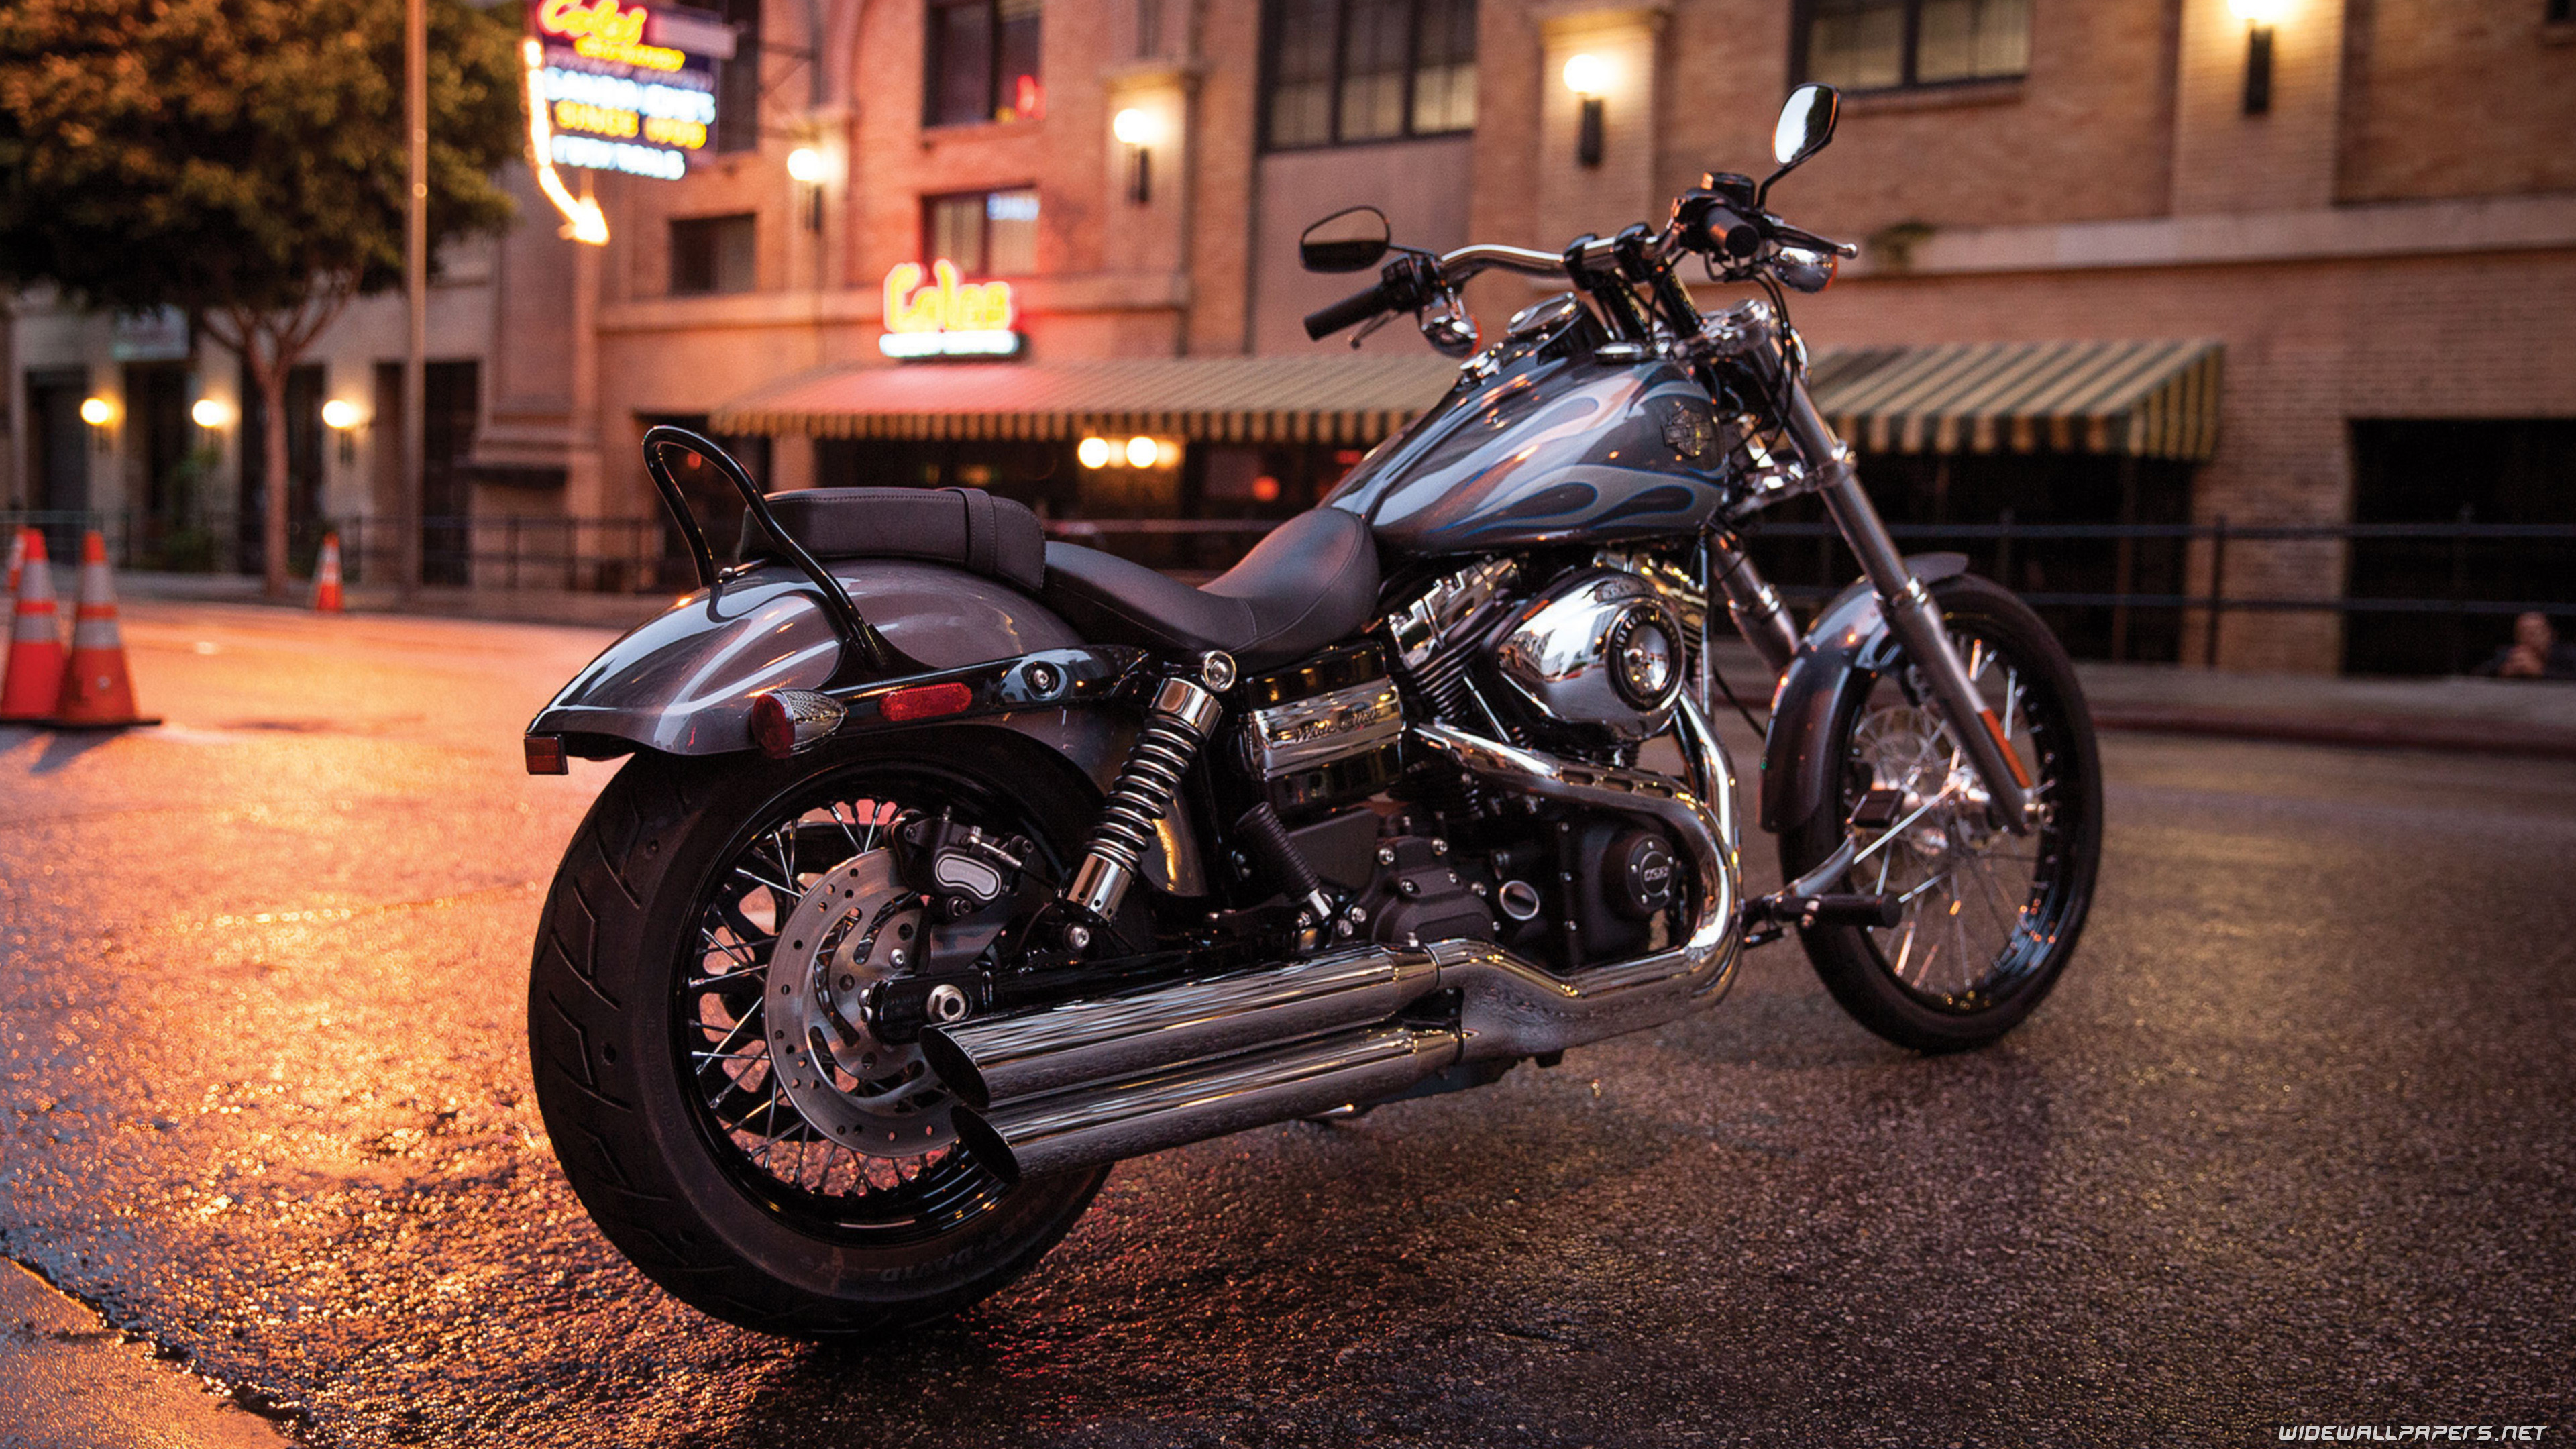 Harley Davidson Dyna Wide Glide Motorcycle Wallpapers 3840x2160